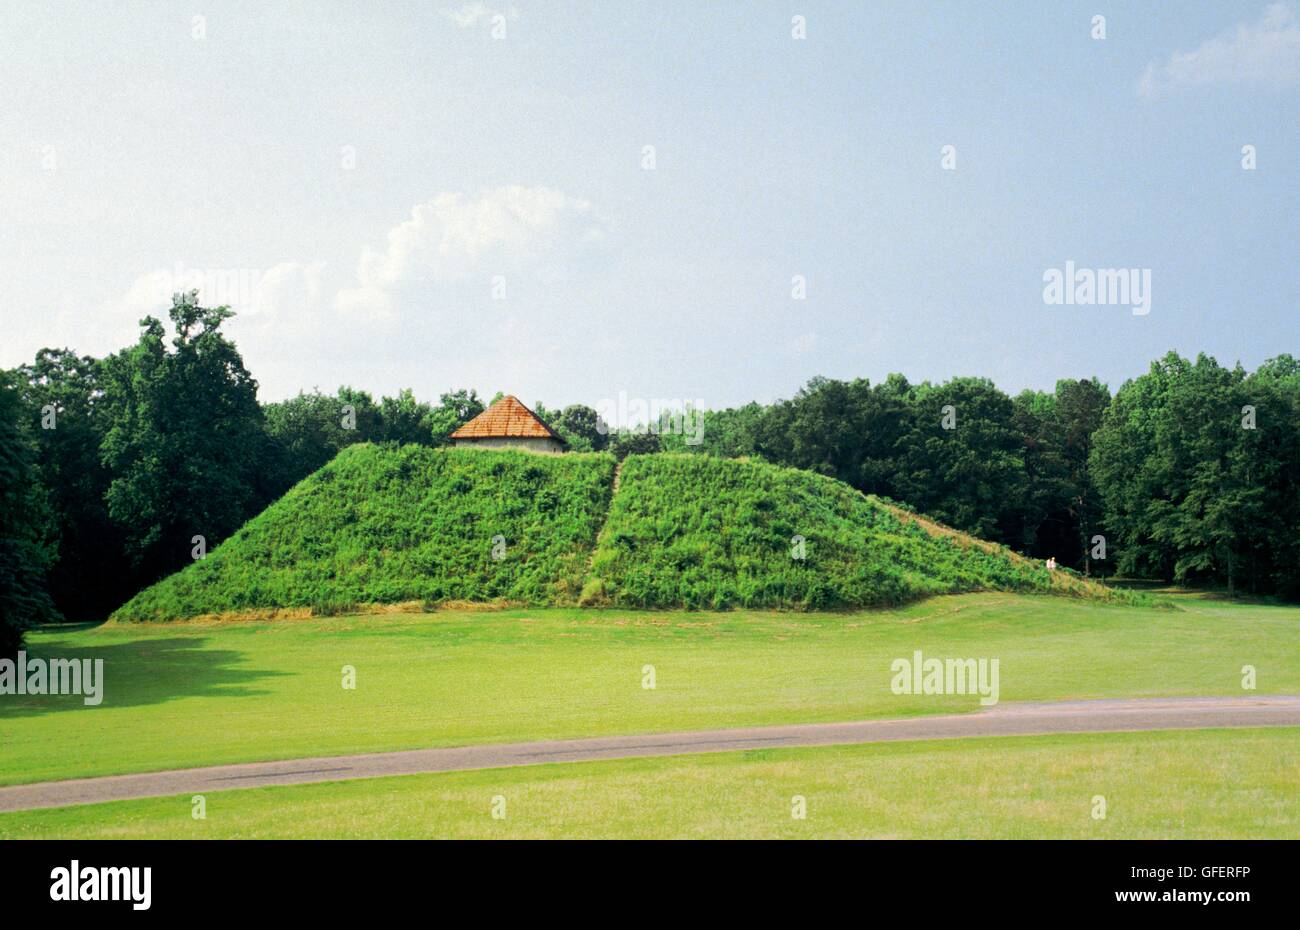 American Indian Mississippi Culture prehistoric site known as Moundville in Mound State Indian Monument, Tuscaloosa, Alabama USA Stock Photo